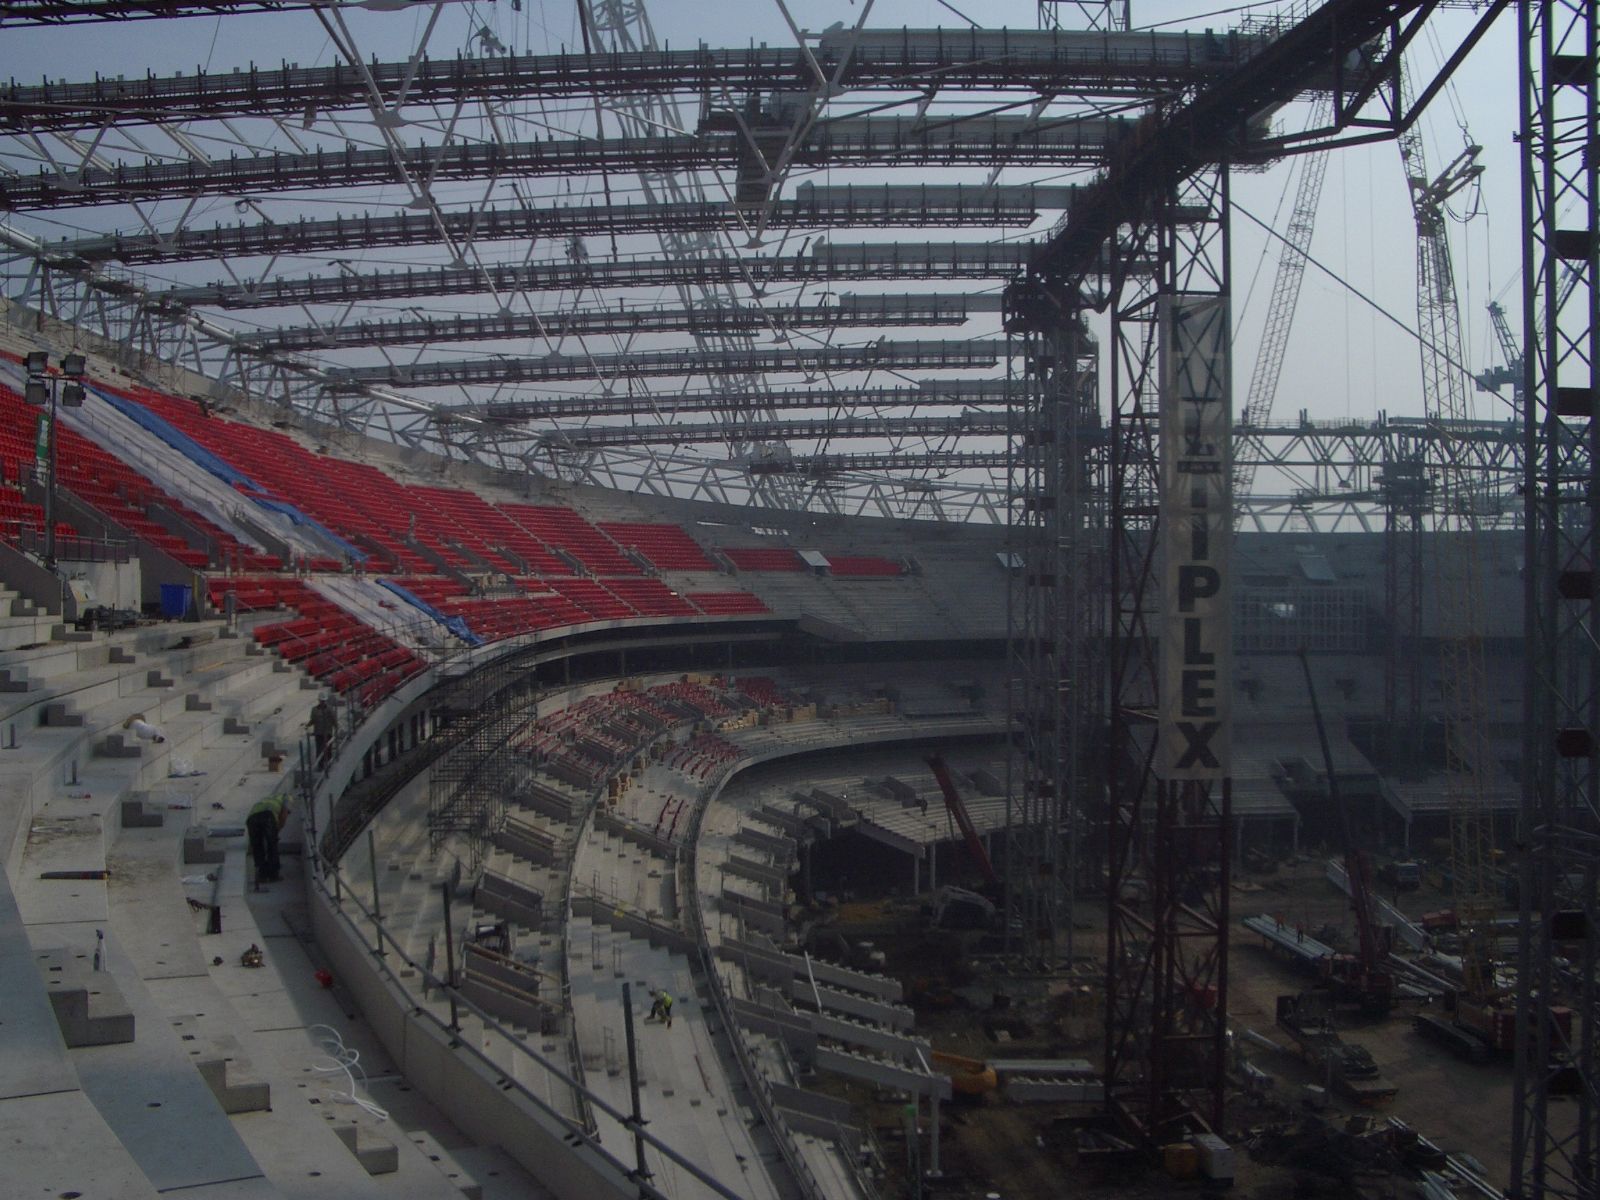 Building of seating of Wembley stadium